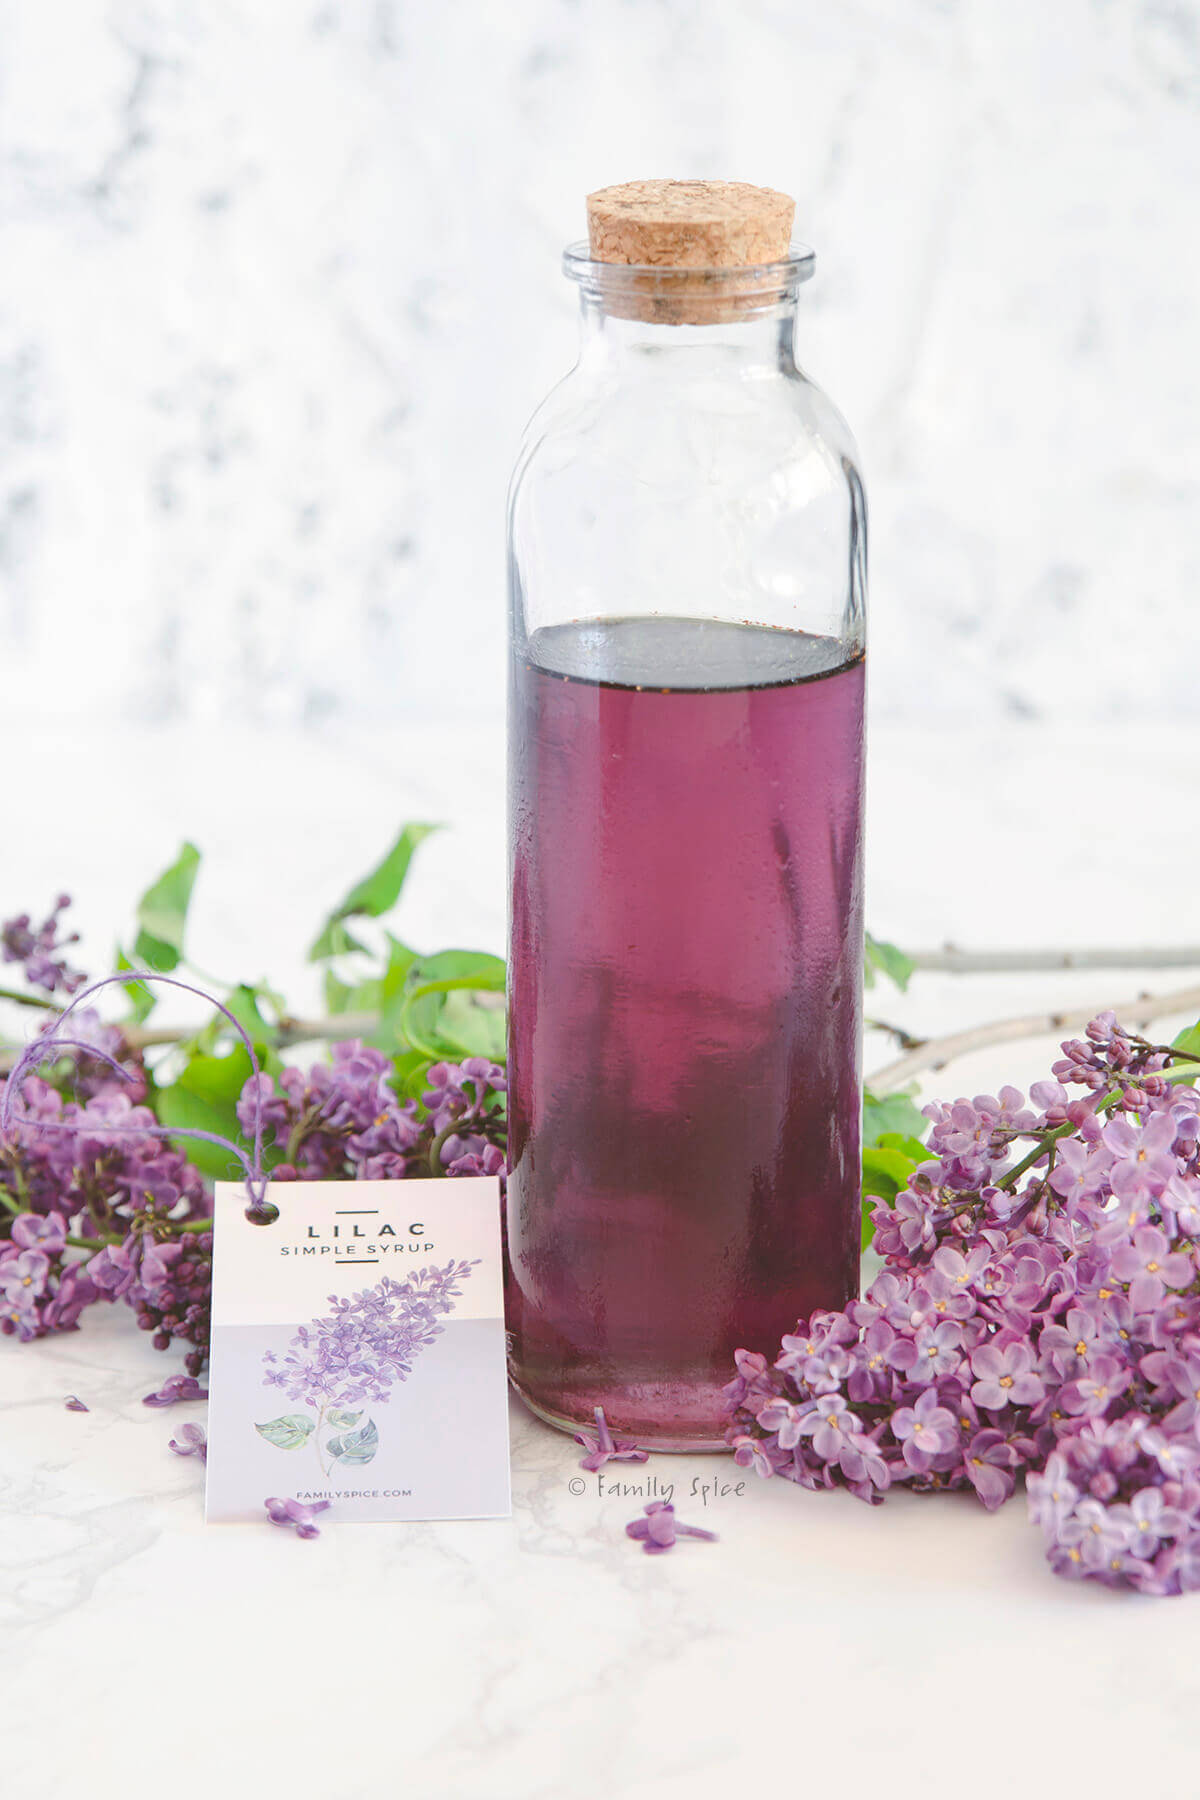 A bottle of lilac syrup with a homemade label and fresh lilacs next to it